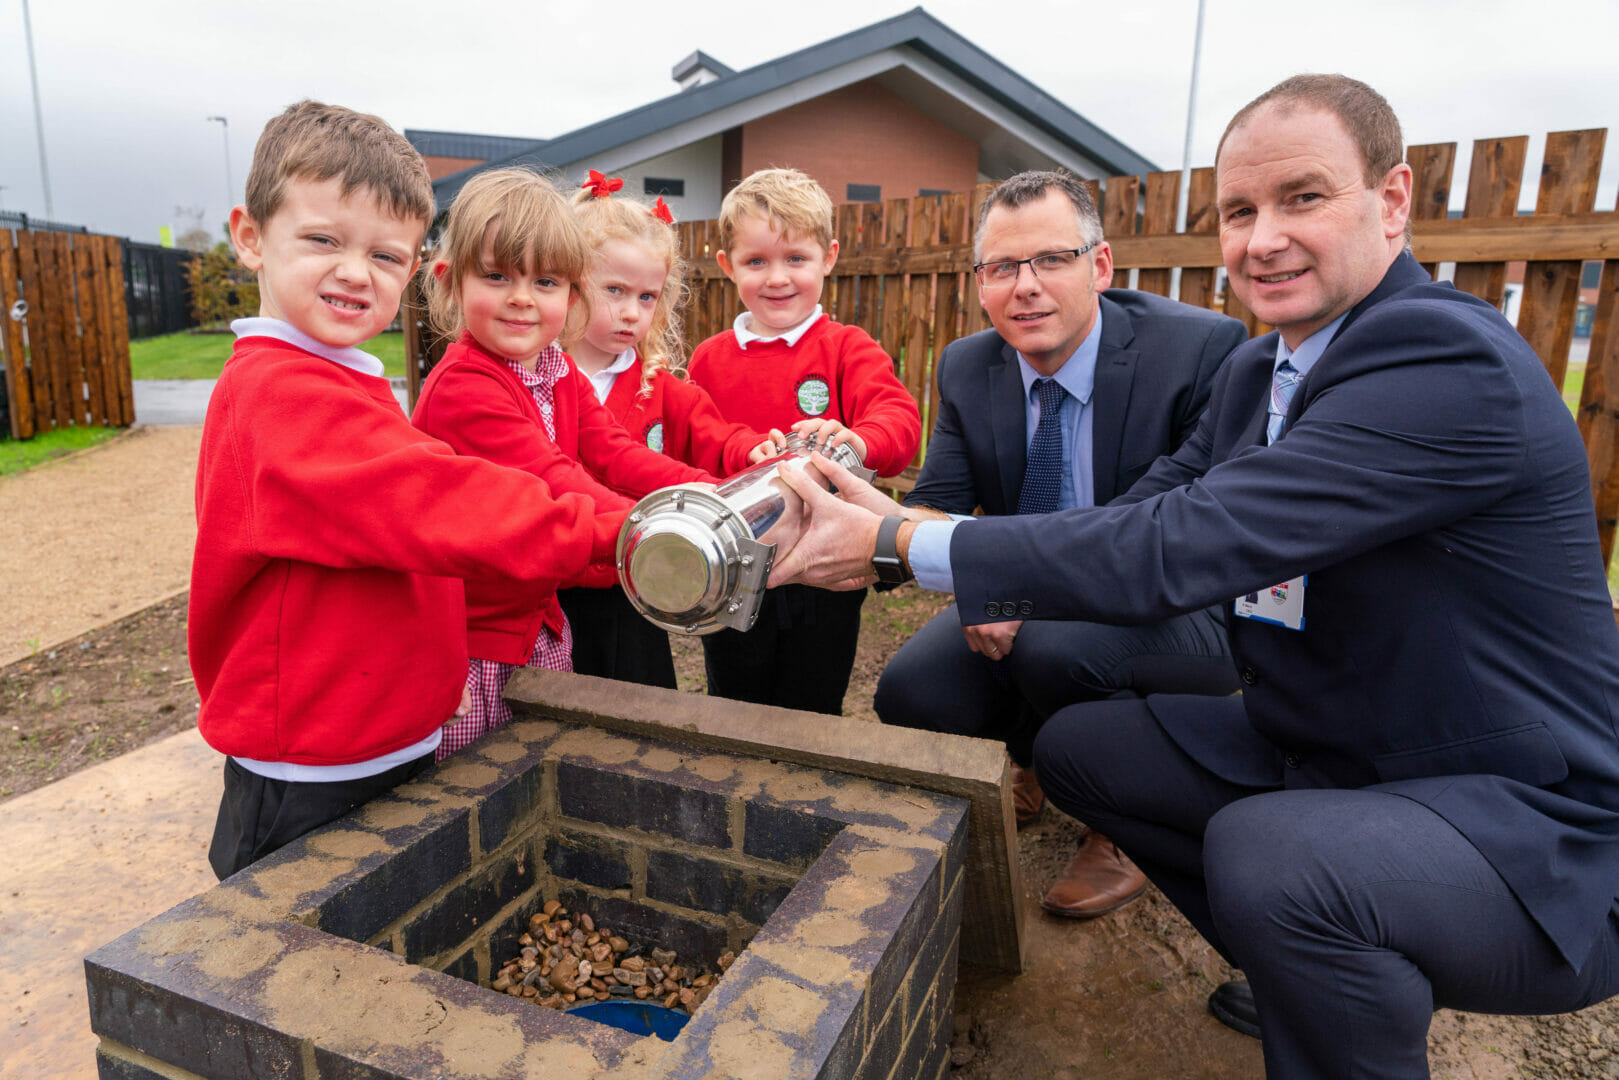 A time capsule has been buried at a new £7m primary school which has been built by Clegg Construction